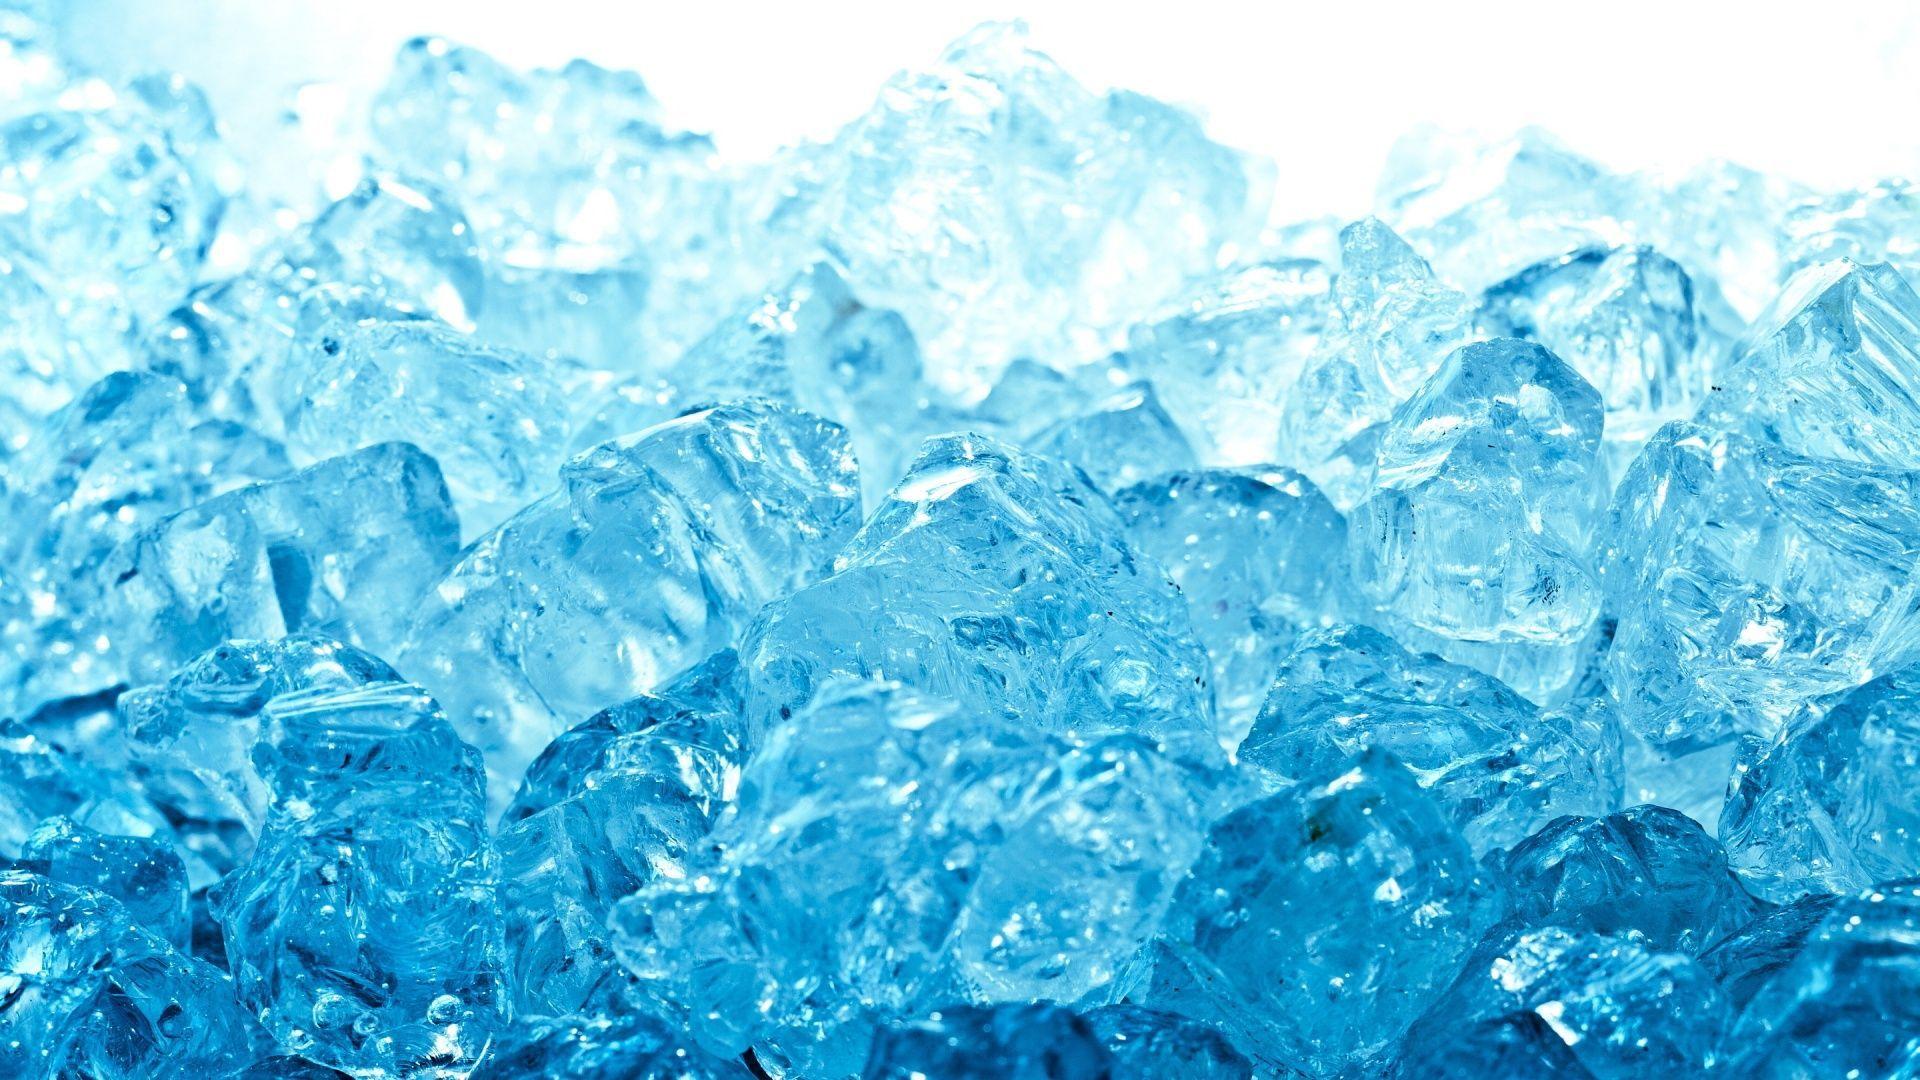 General. Ice